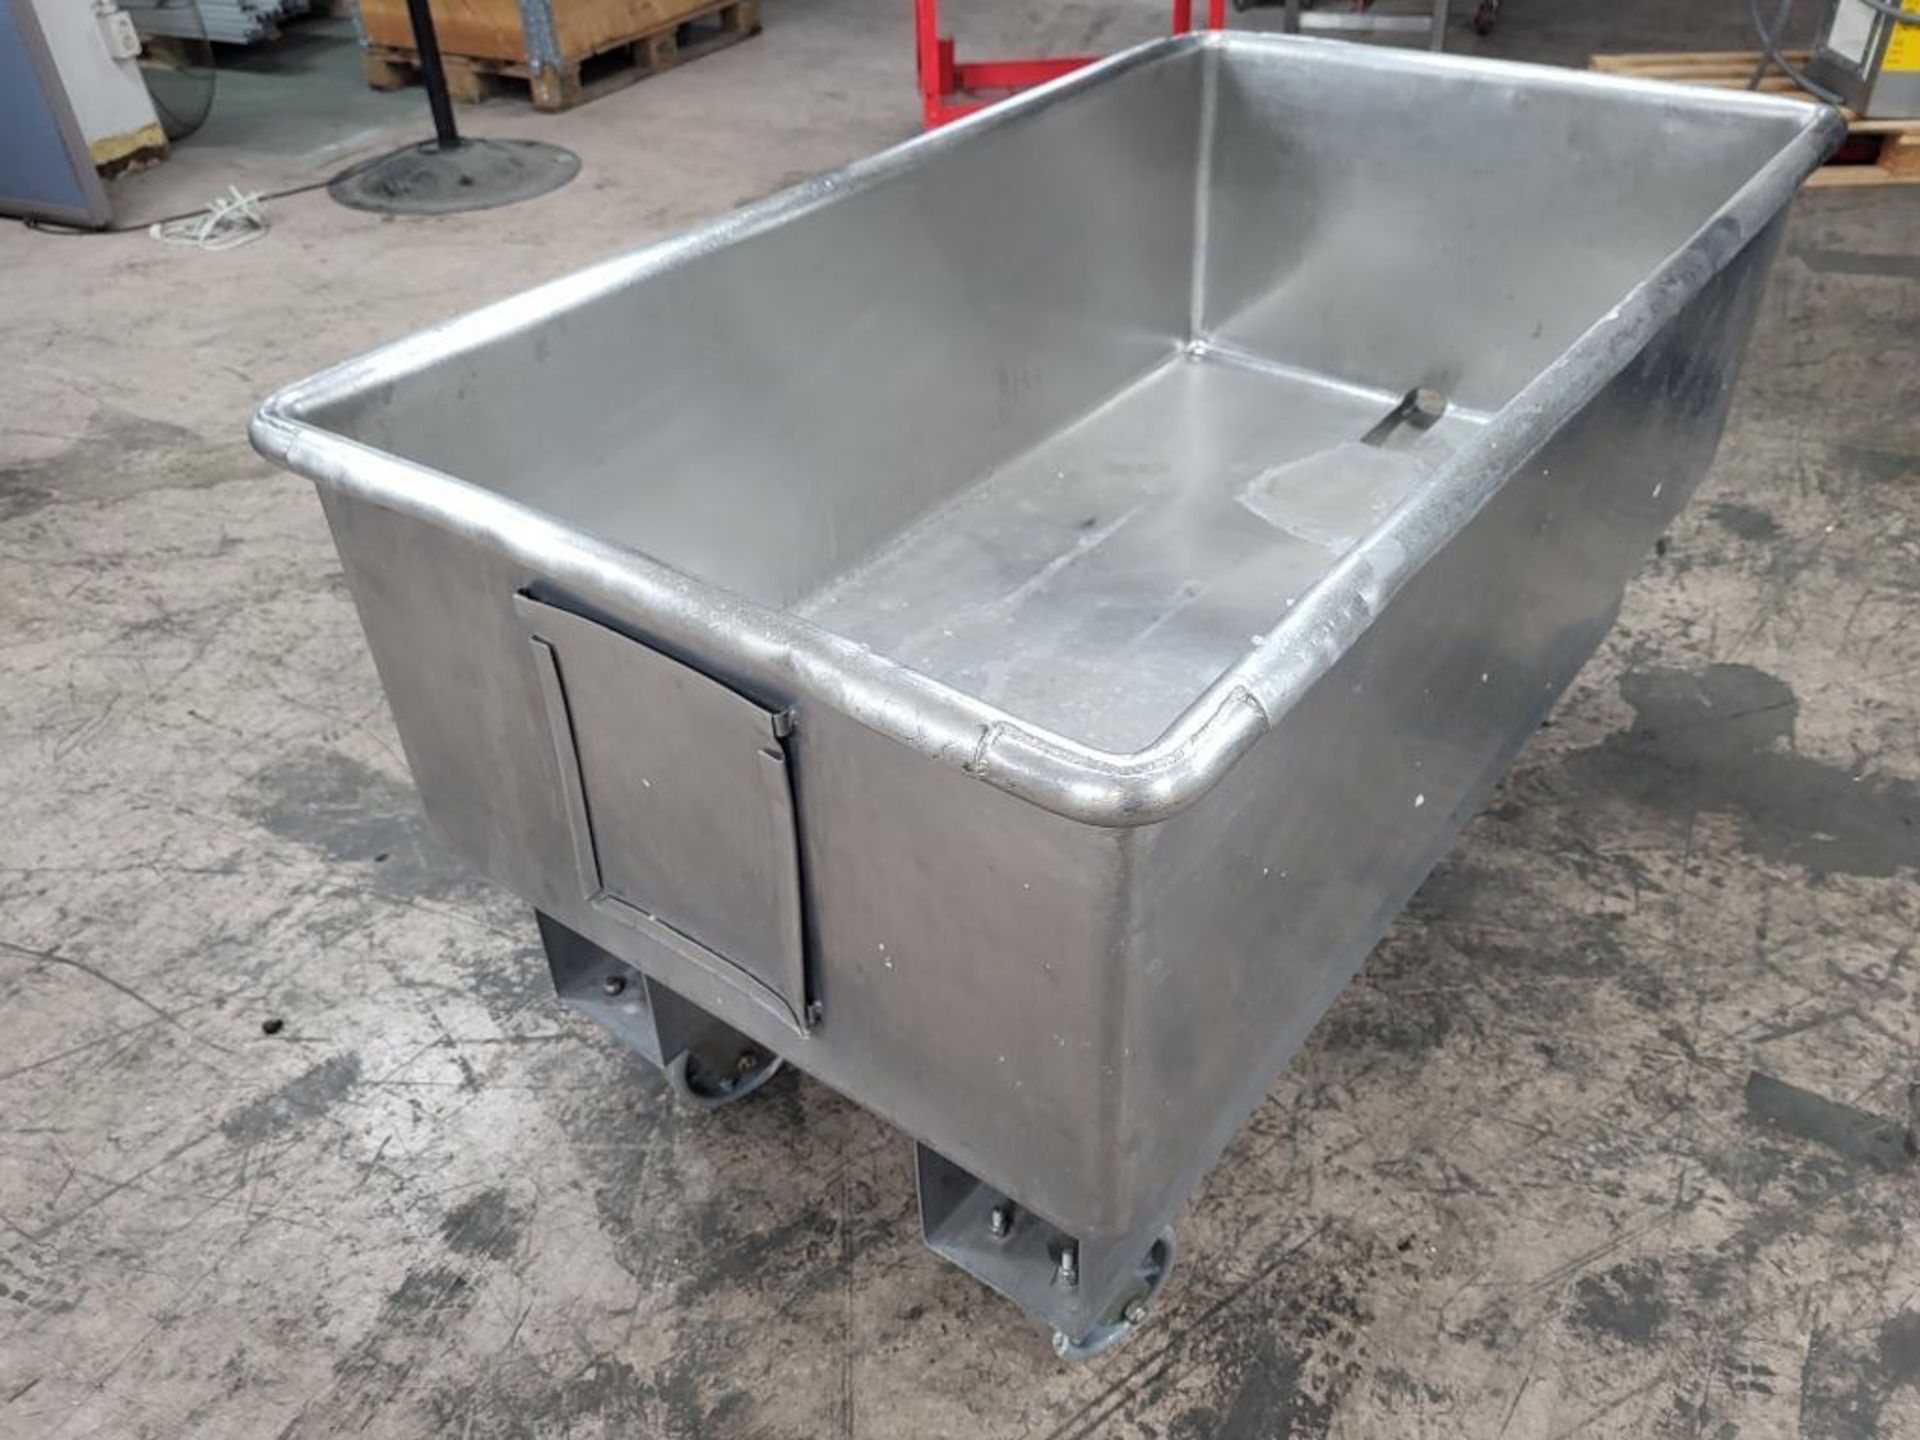 Stainless Steel Tub On Wheels 28x51 x 17 deep With Drain - Image 3 of 3